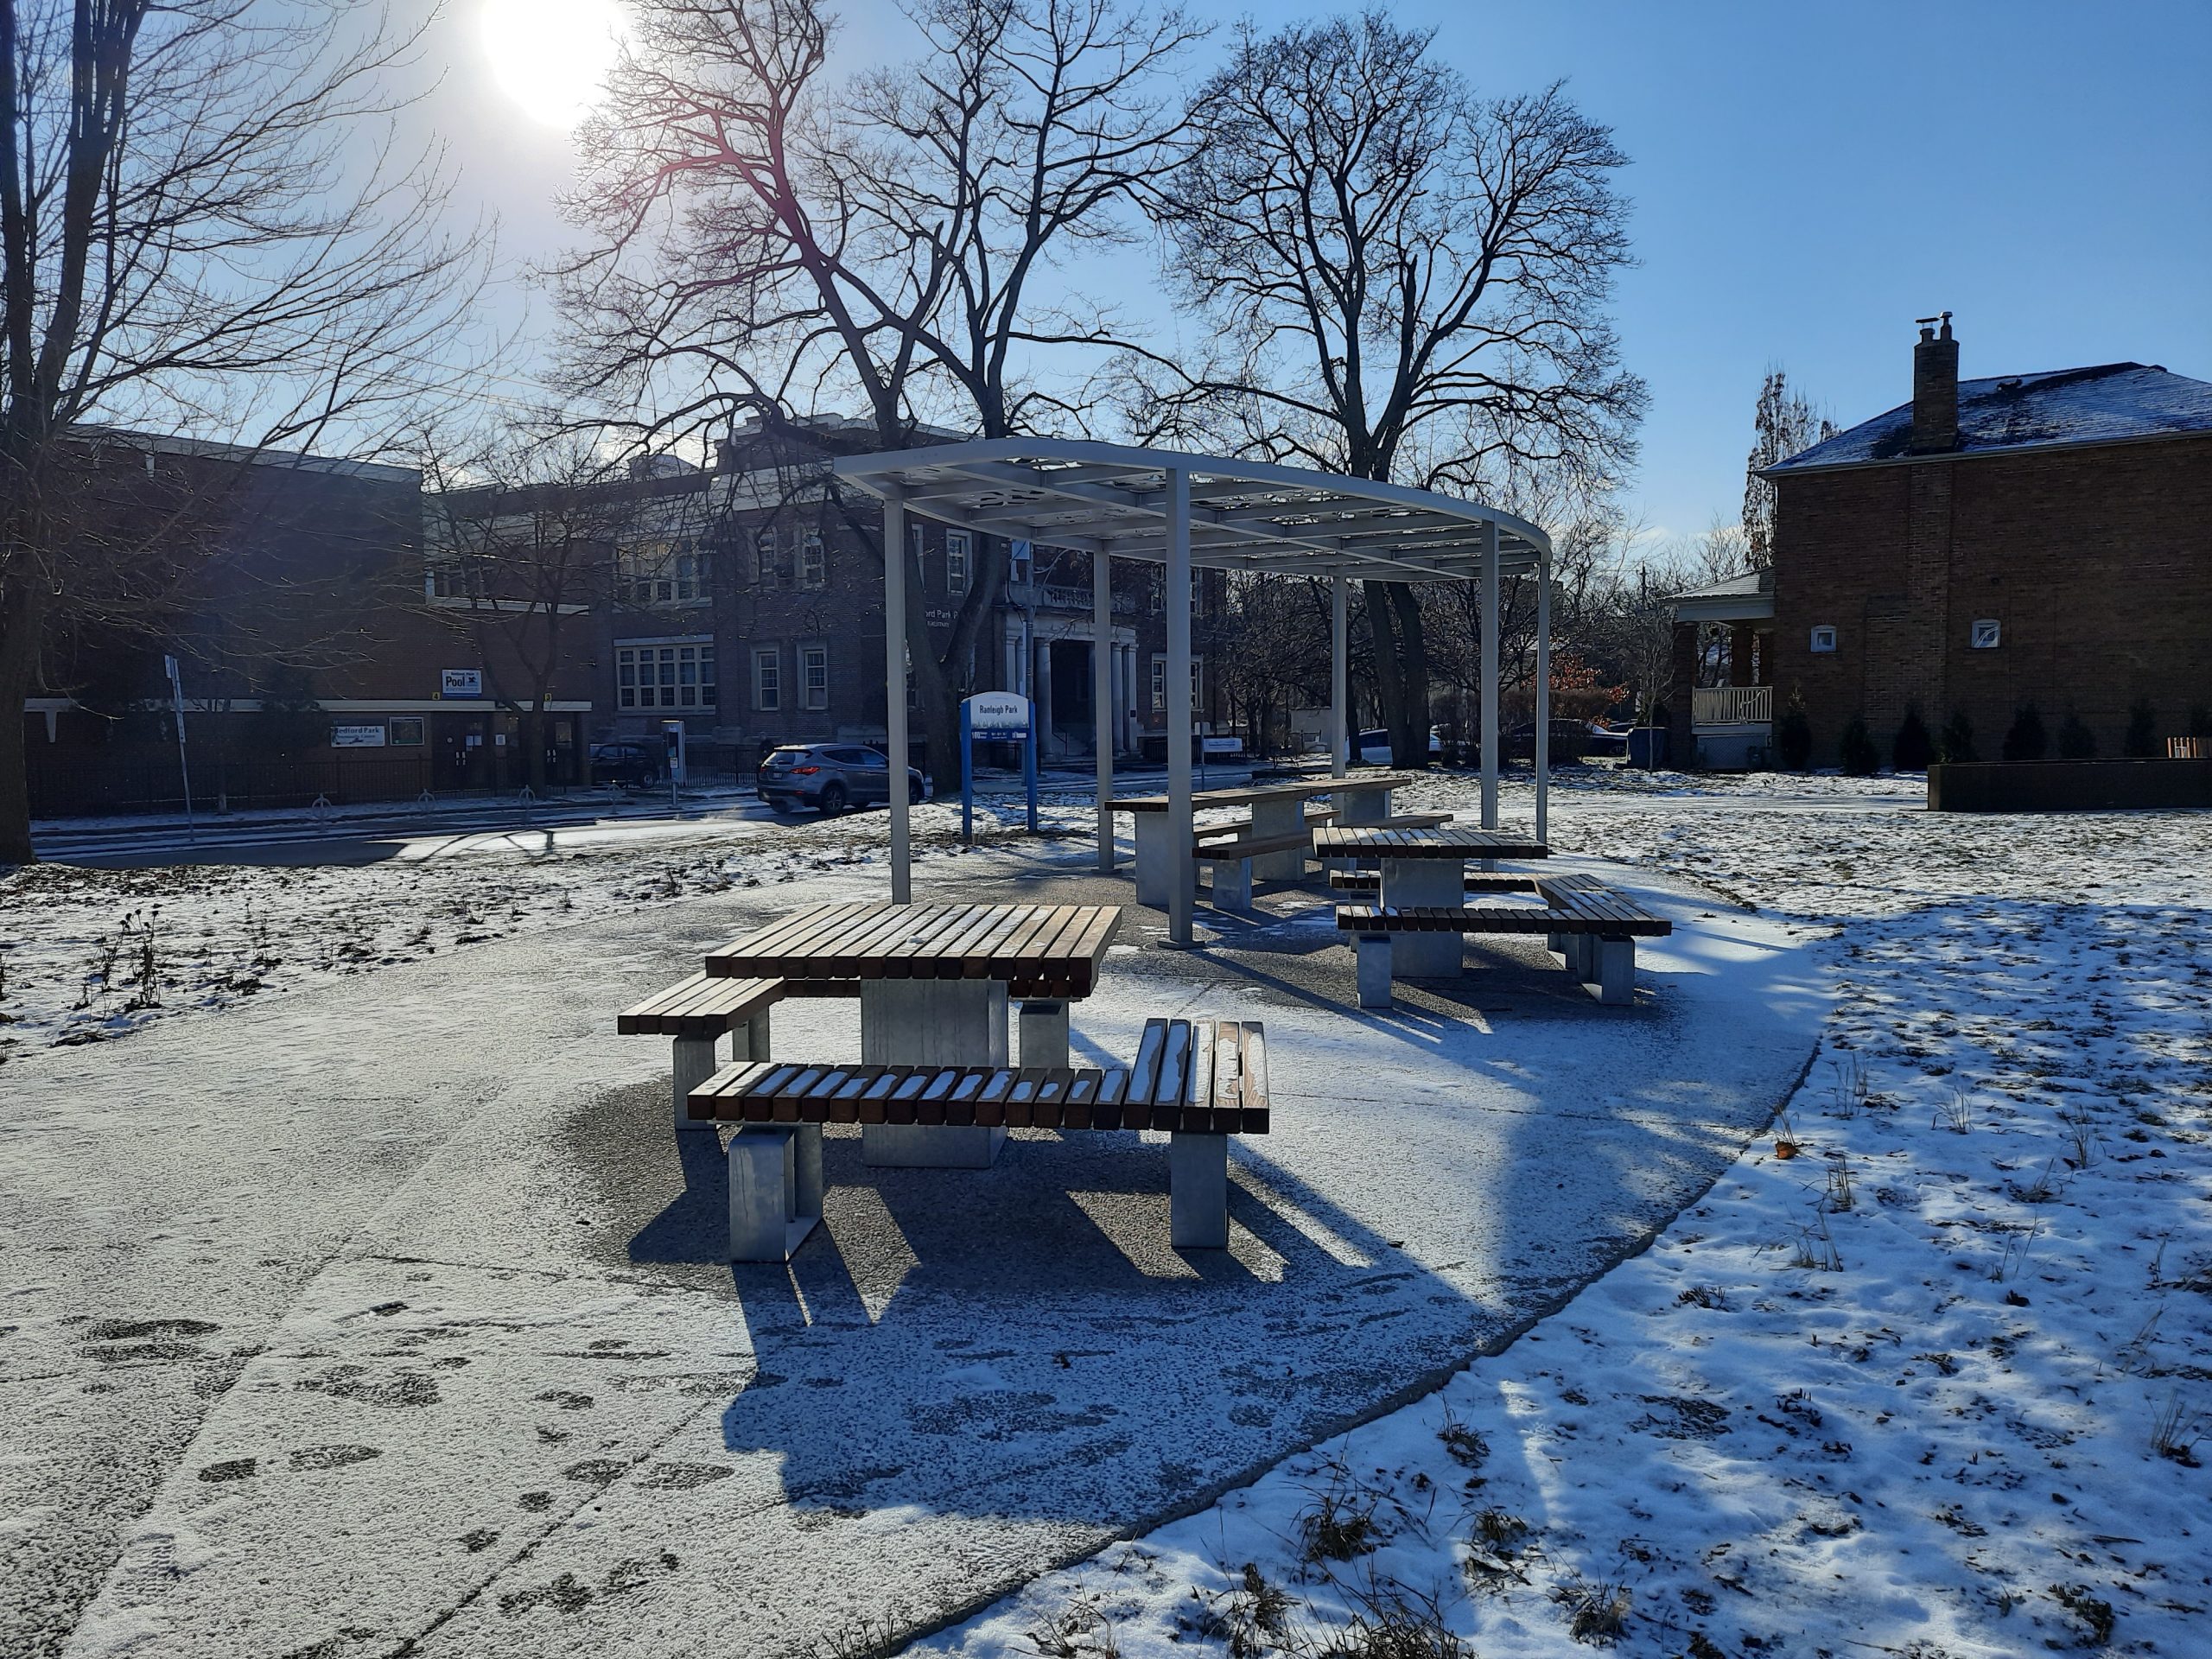 Photograph of the new Ranleigh Park showing new seating area with custom shade structure, picnic table, and games tables, with mature trees in the background.